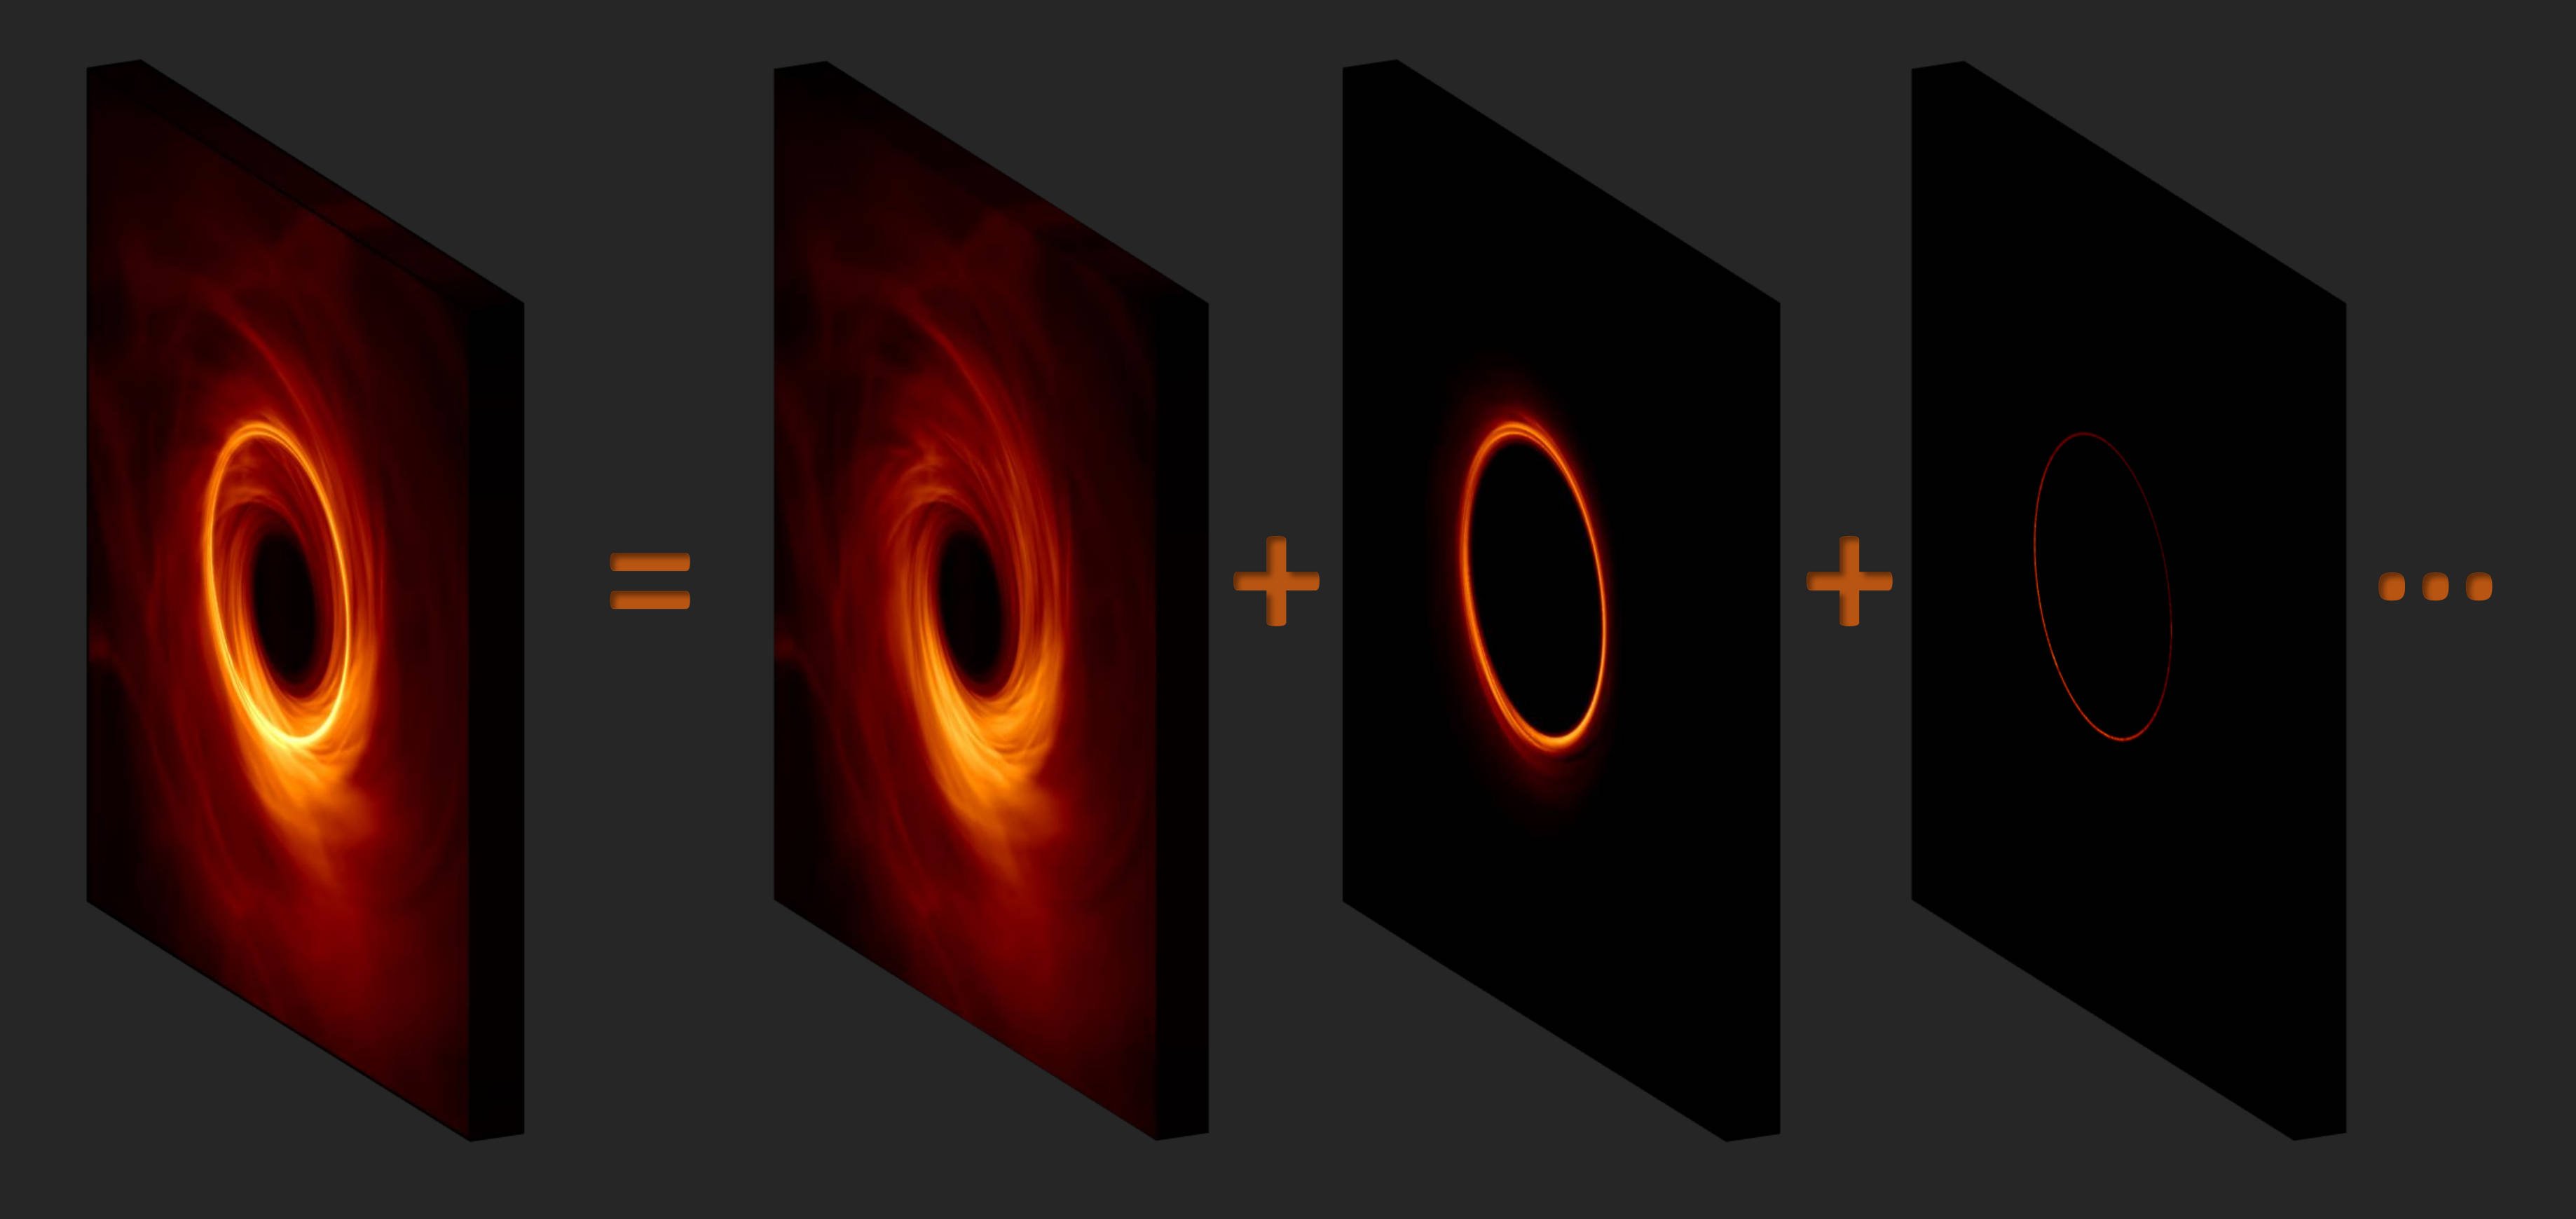 Remember That Blurry First Ever Photo Of A Black Hole Turns Out